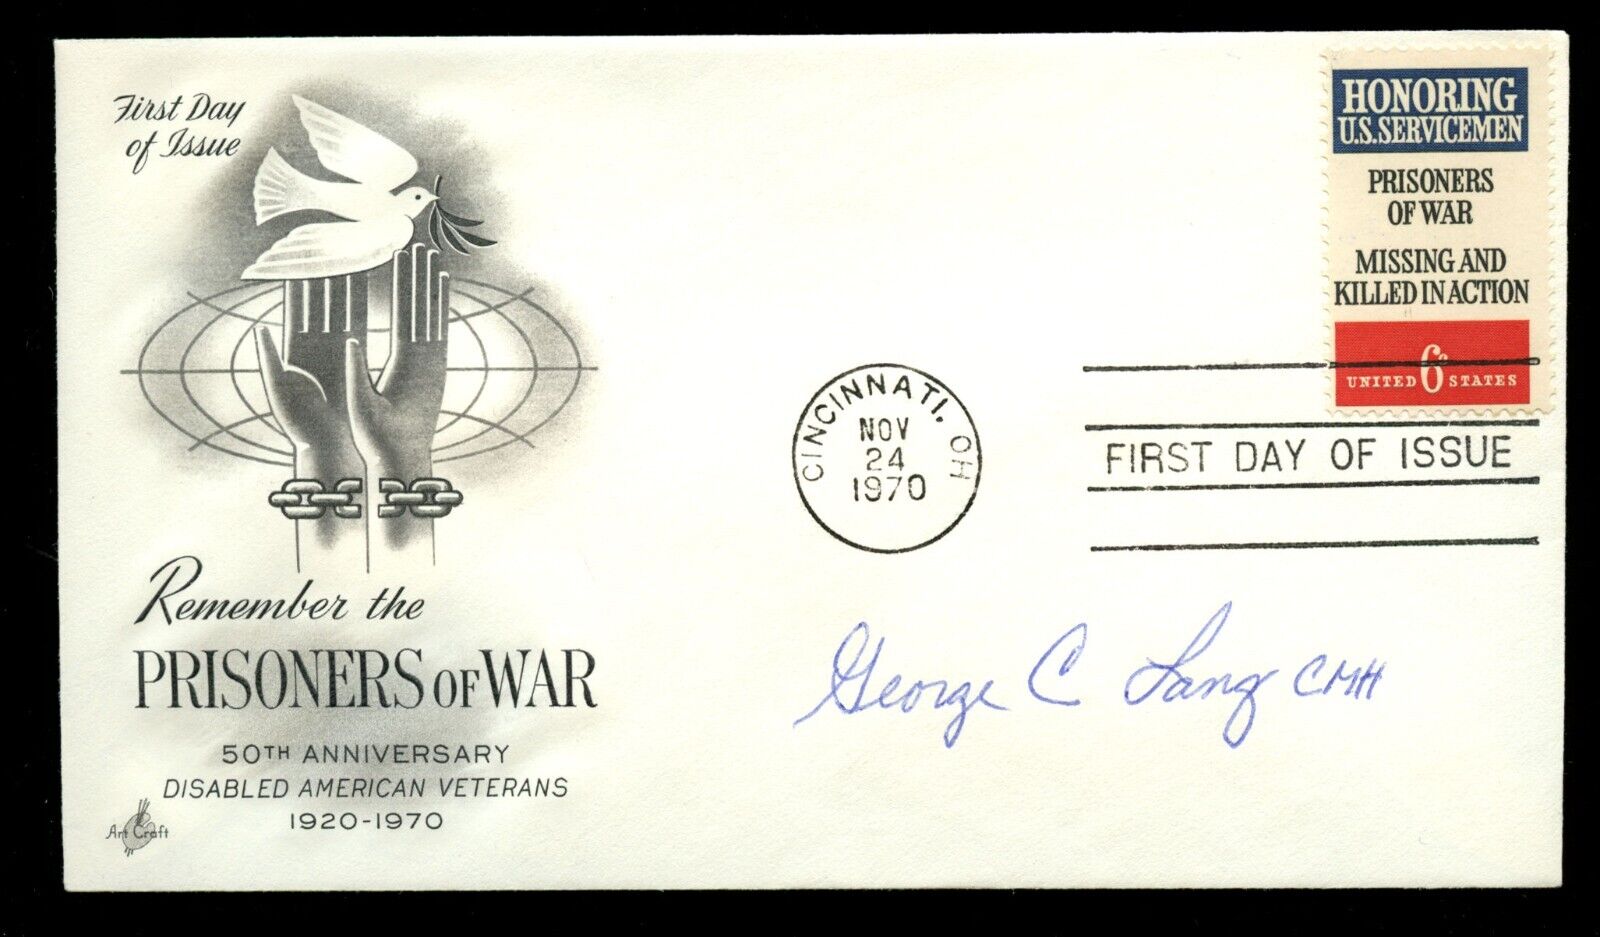 George Lang d2005 signed autograph FDC Medal of Honor Recipient US Army Vietnam